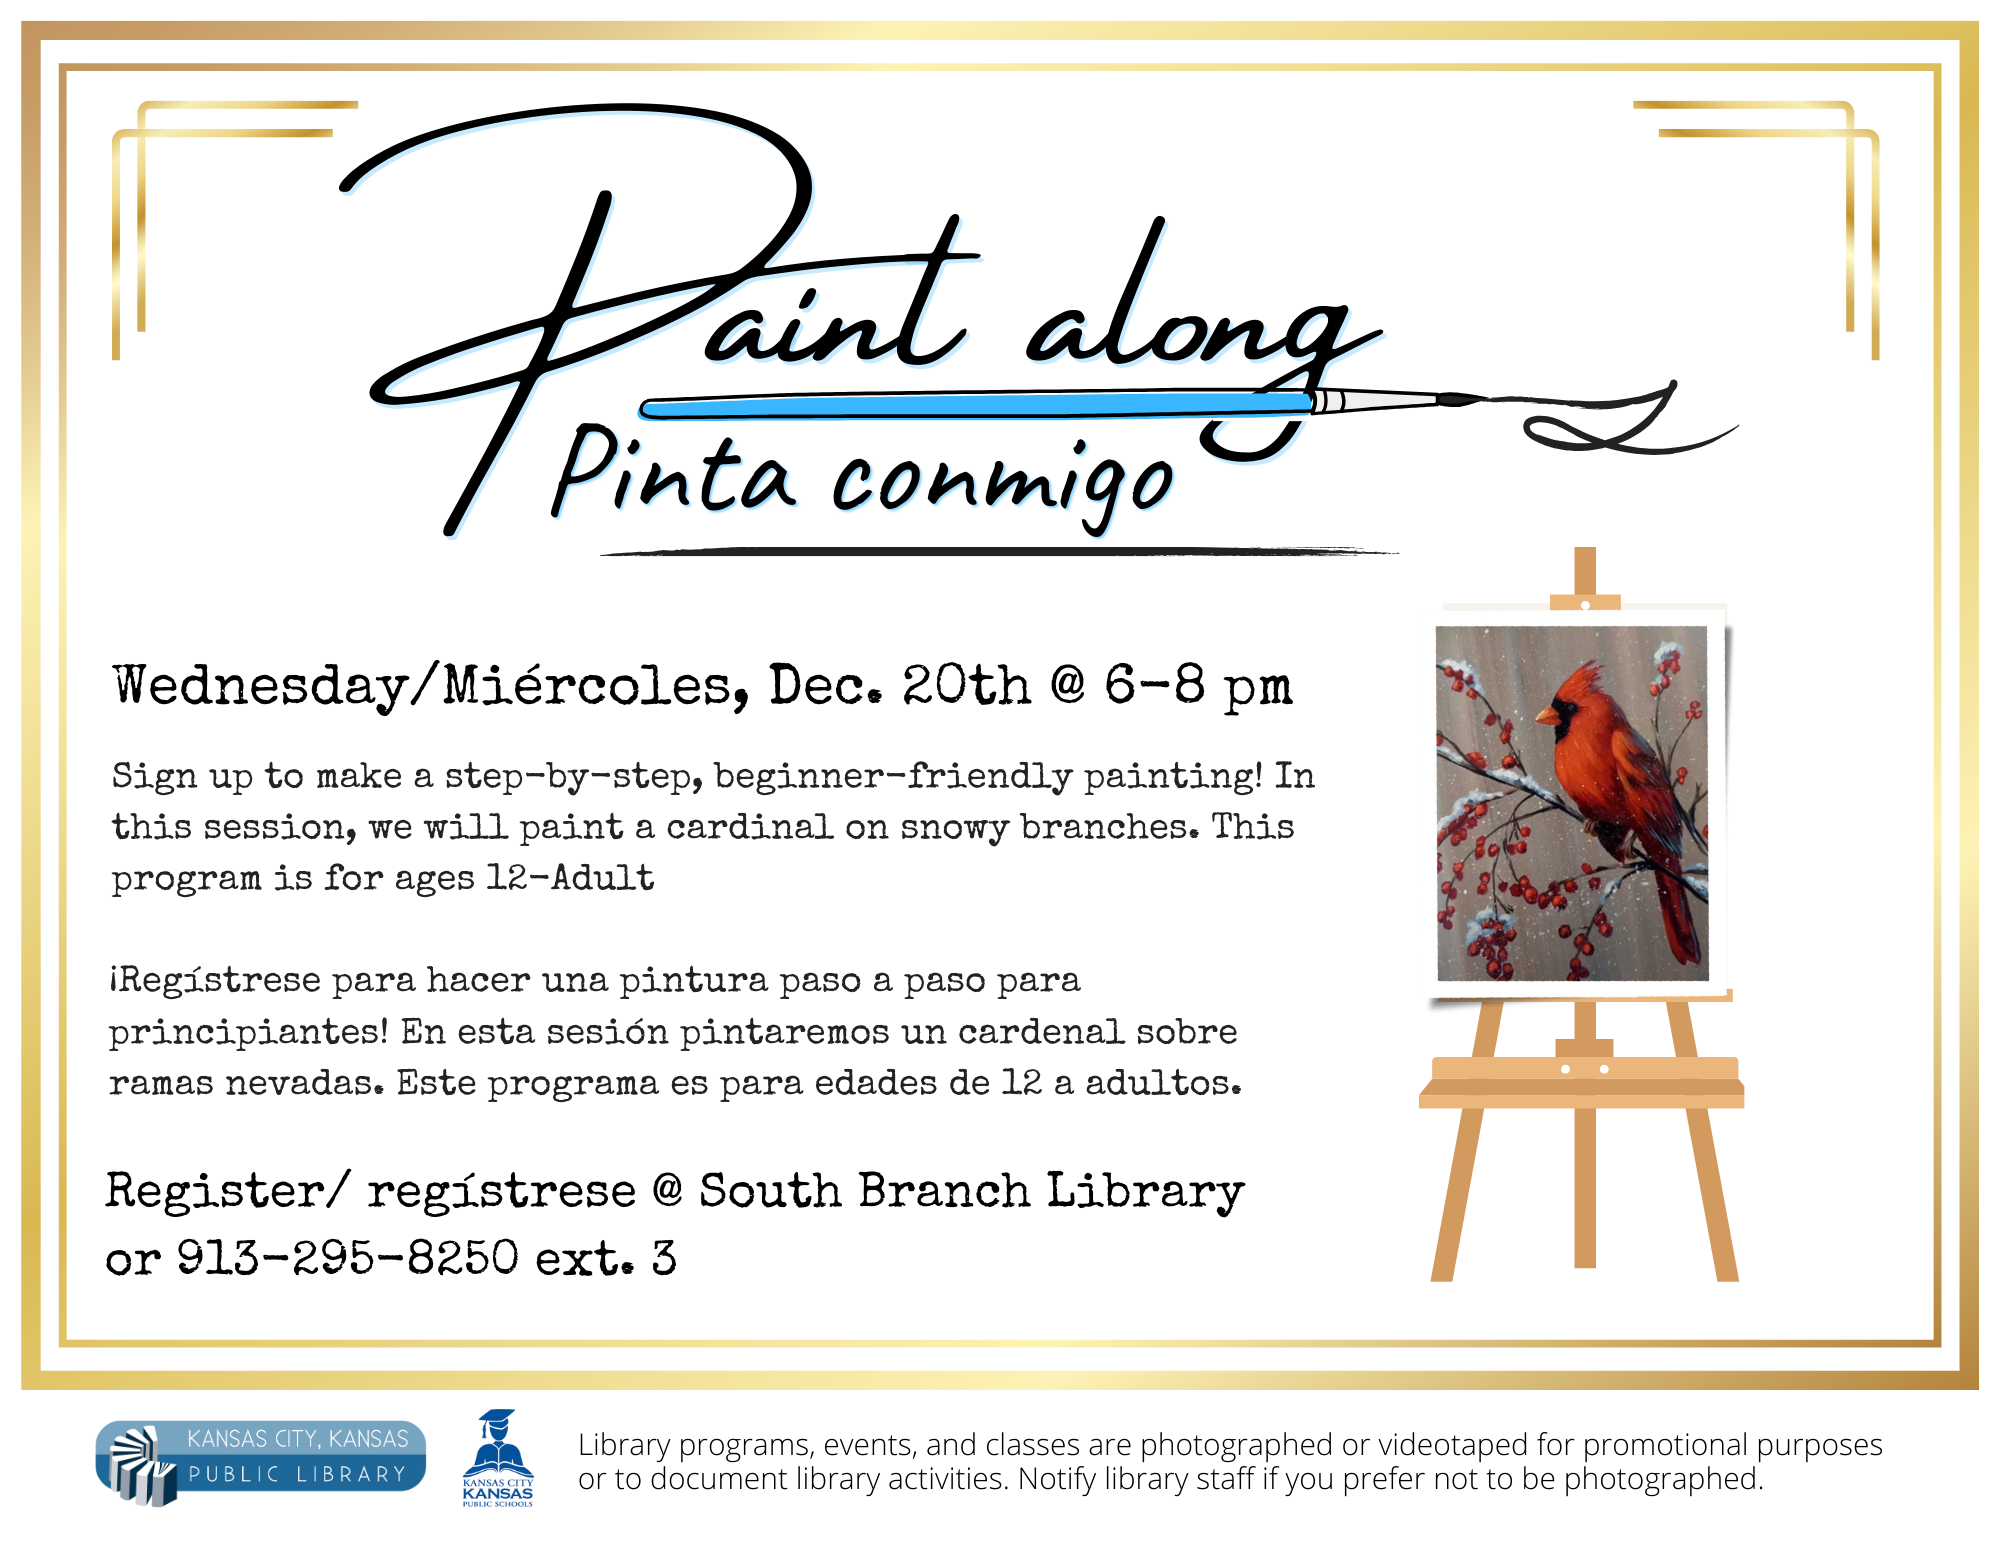 Paint Along @ 6pm on Dec. 20th. Painting a cardinal on snowy branches. Call to register.